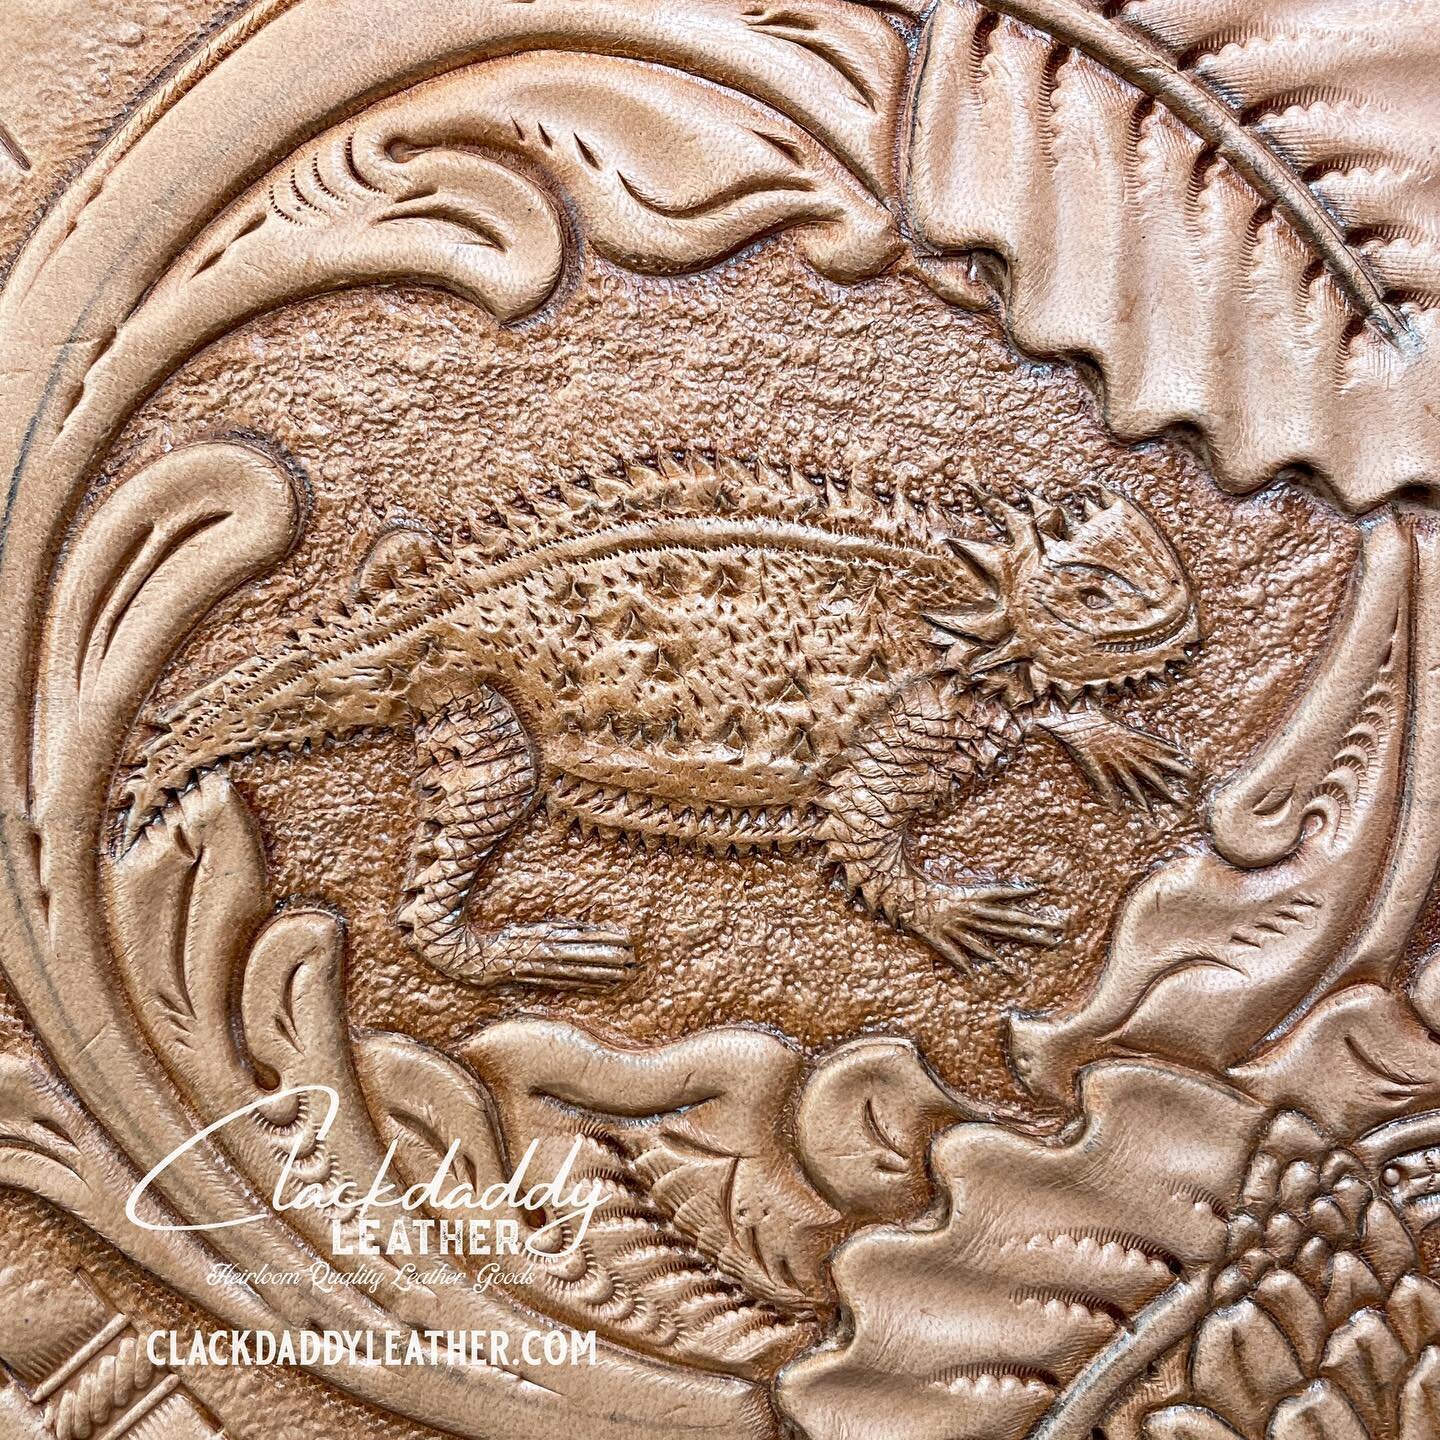 TIL hornytoad is a banned hashtag😂 Here&rsquo;s a #closeupshot of the one from the flower vase I&rsquo;m working on. #leatherart #leathercarving #hornedlizard #texashornedlizard #westernstyle #smtx #satx #sheridanstyle #hermannoakleather